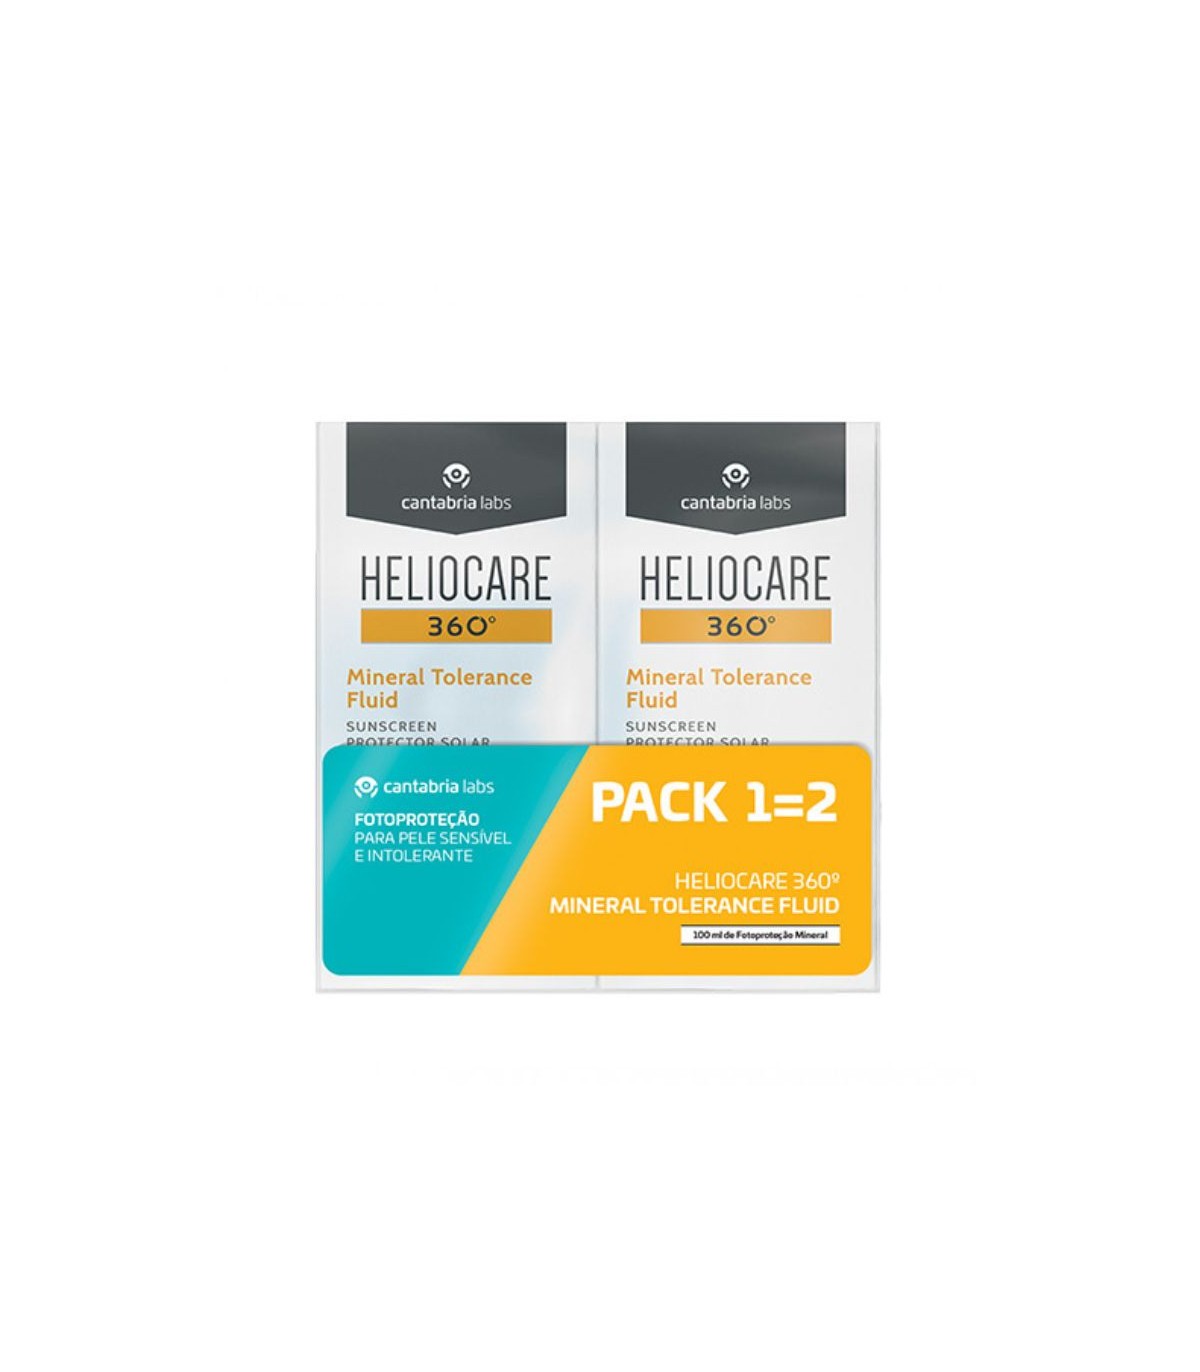 Heliocare Promo Pack: Heliocare 360º Mineral Tolerance Fluid Special Price